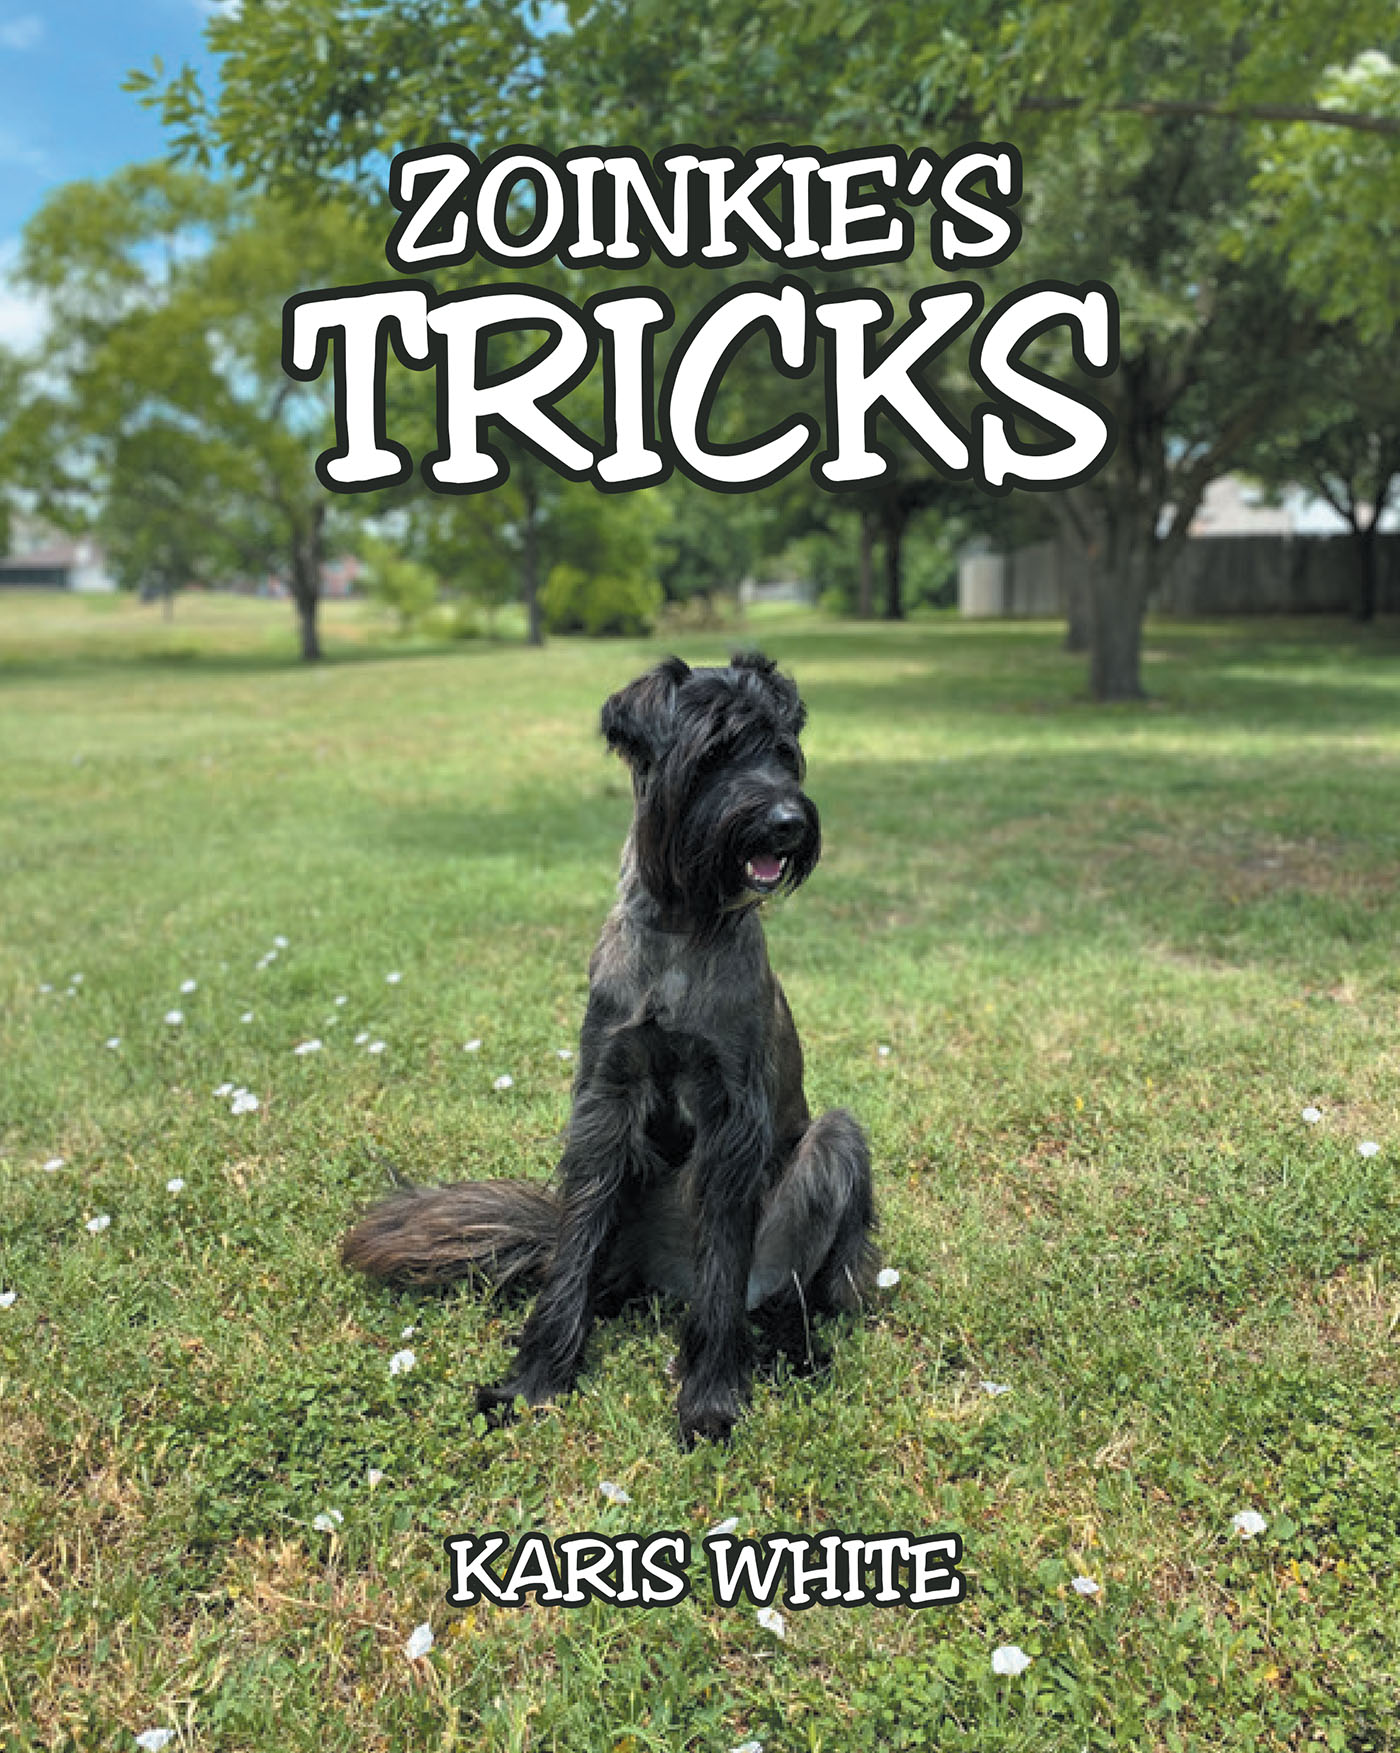 Author Karis White’s New Book, "Zoinkie's Tricks," Takes Readers on an Adorable Journey as They Learn an Important Lesson on Dog Ownership from a Kind Dog Named Zoinkie